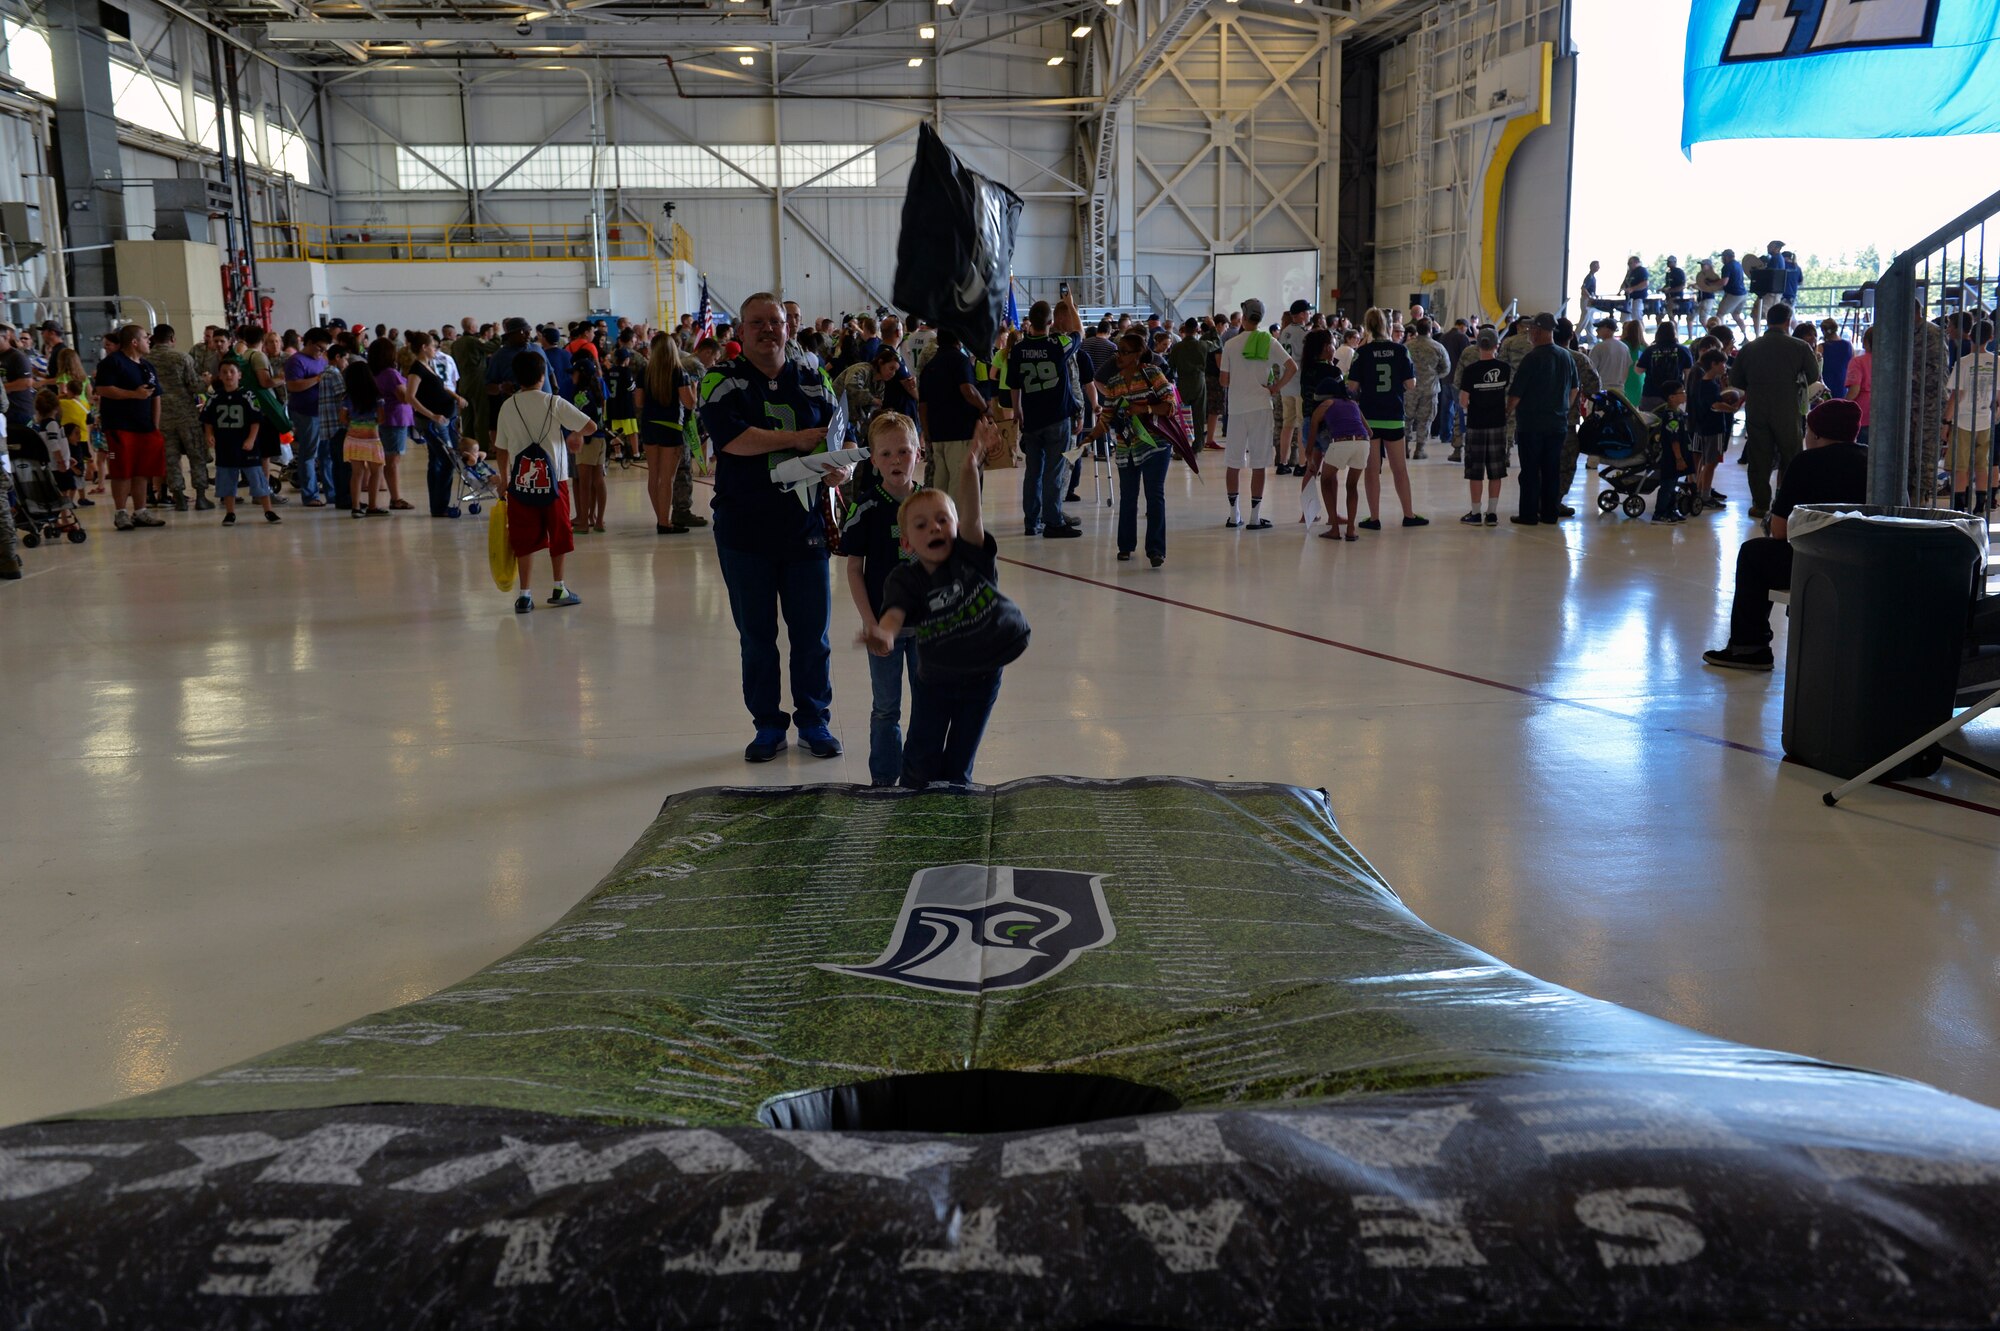 A young Seattle Seahawks fan throws an oversized bean bag July 1, 2014, during the 2014 Seattle Seahawks 12 Tour at Joint Base Lewis-McChord, Wash. The tour’s entertainment featured the Vince Lombardi Trophy, autographs from players, various games, picture opportunities, and performances from the Sea Gals, Blitz the mascot, and the Blue Thunder drum line band. (U.S. Air Force photo/Staff Sgt. Russ Jackson)